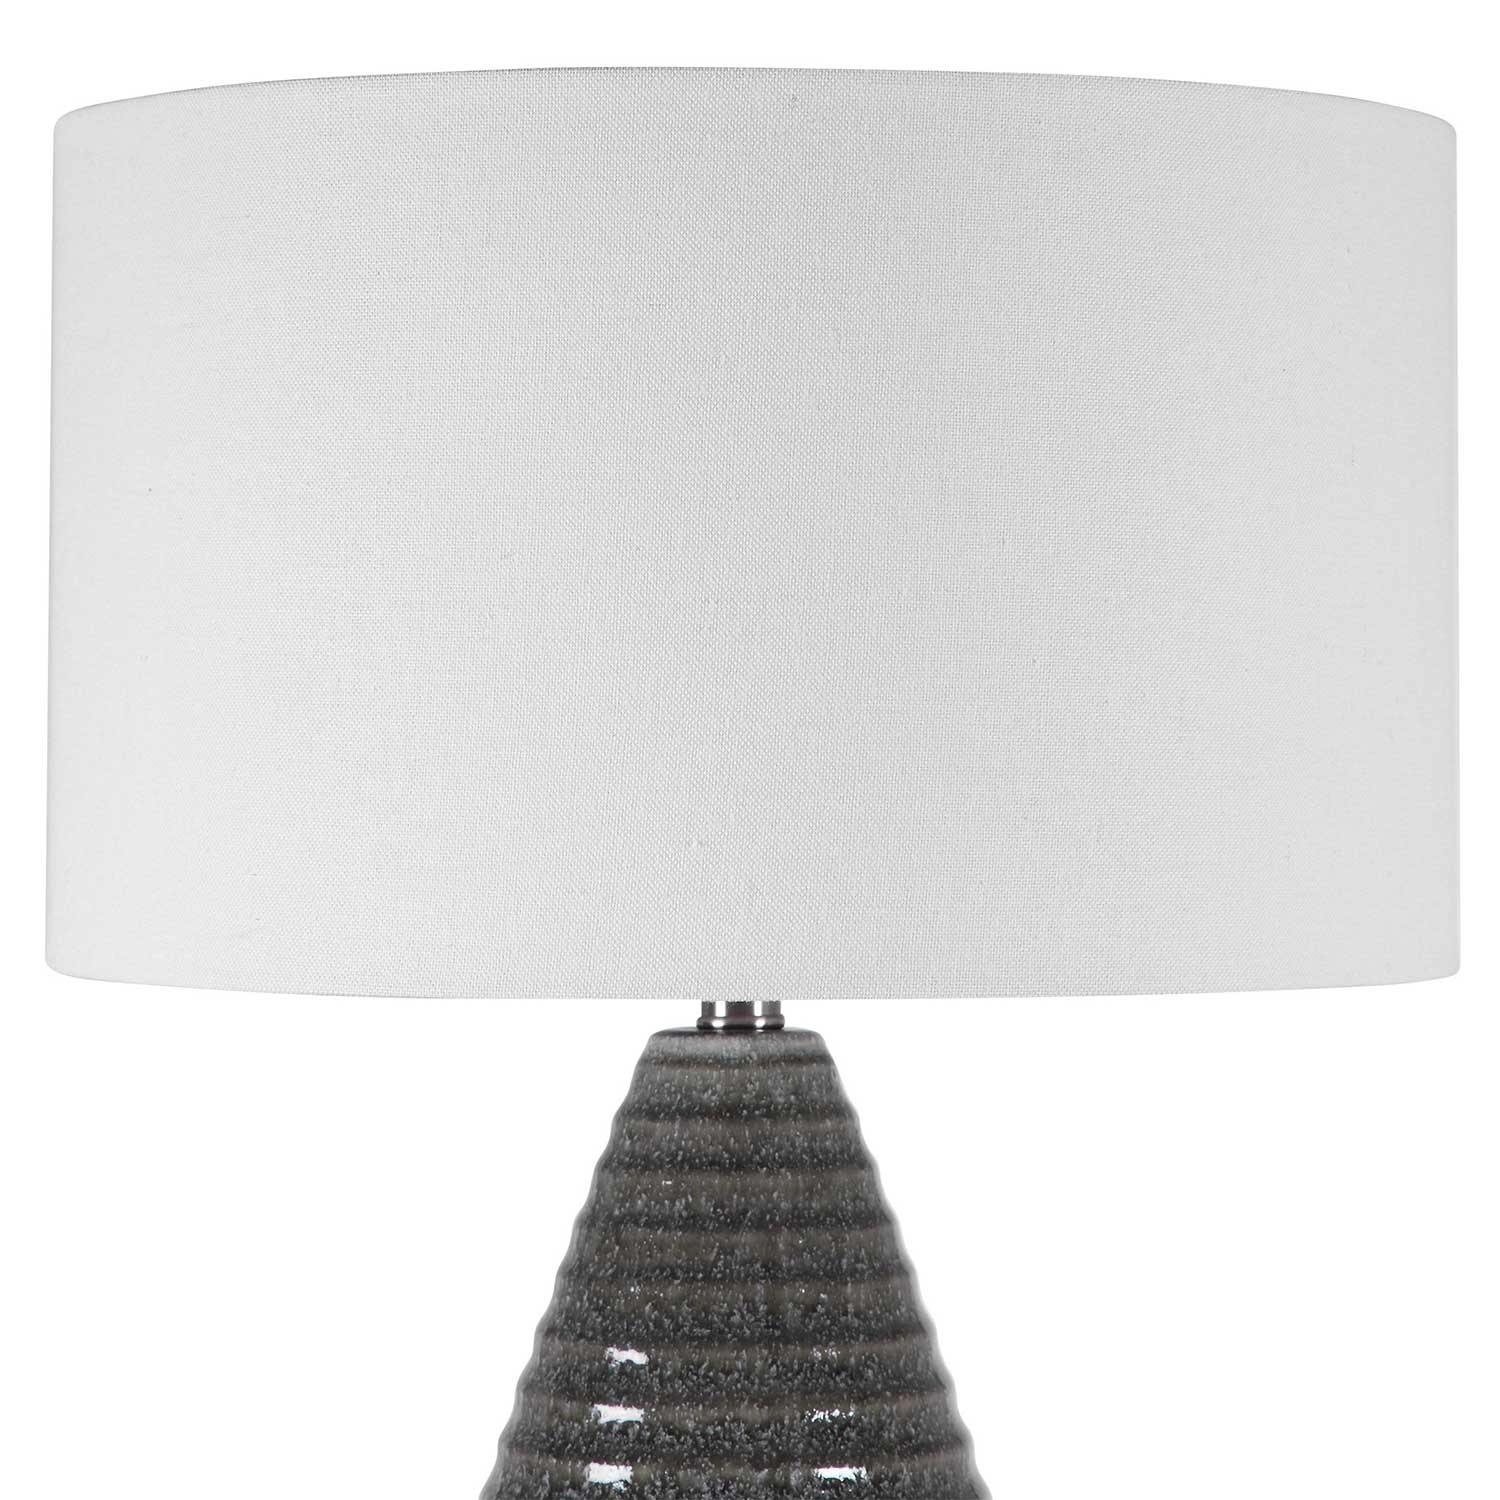 Uttermost Carden Table Lamp - Smoke Gray